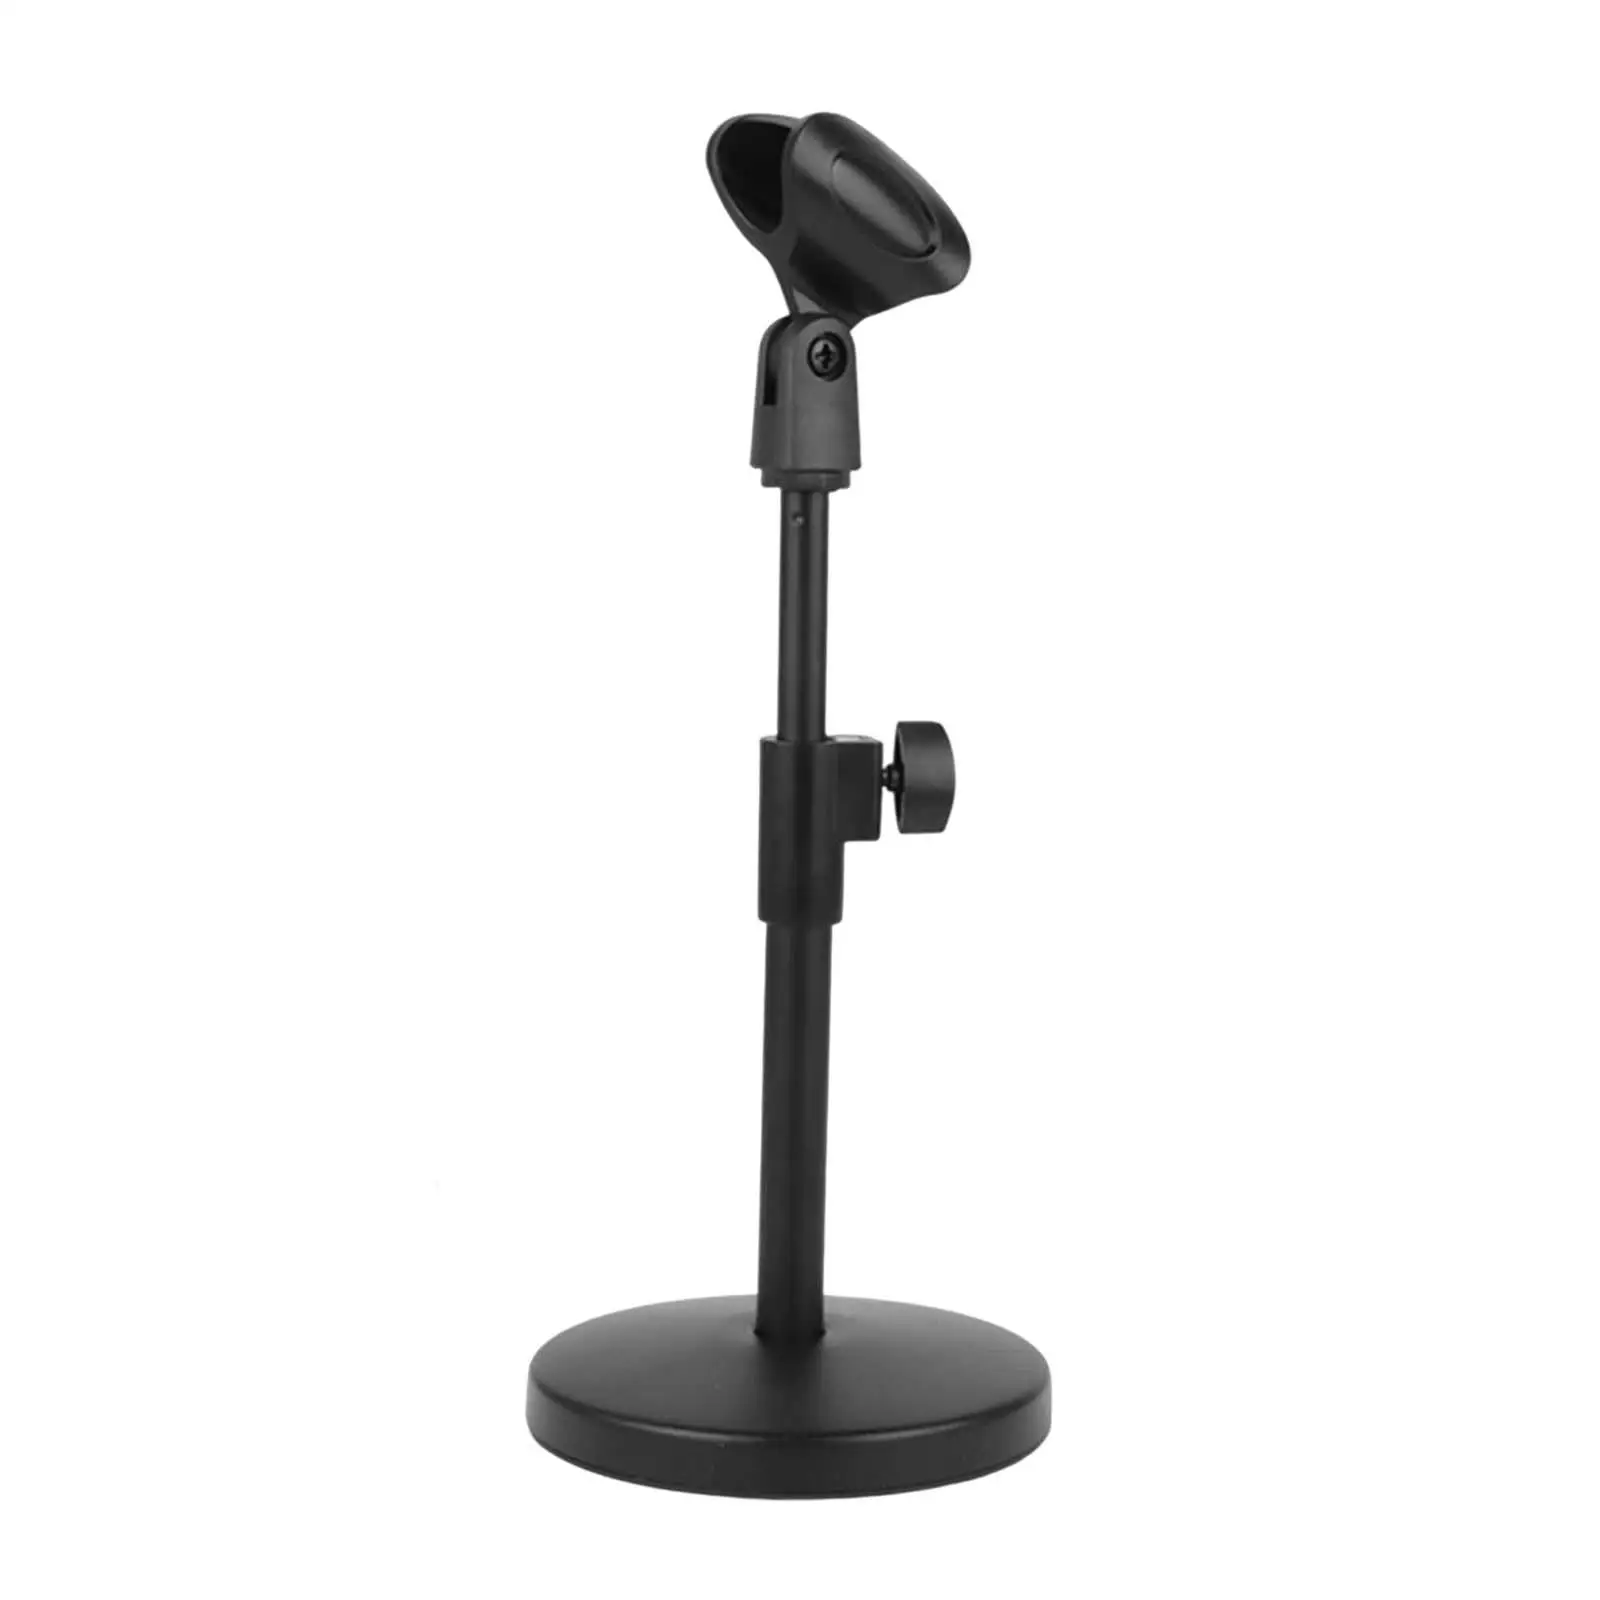 Mini Table Microphone Stand Holder Adjustable Height Multi Function Durable Practical Universal Microphone Stand for Meeting